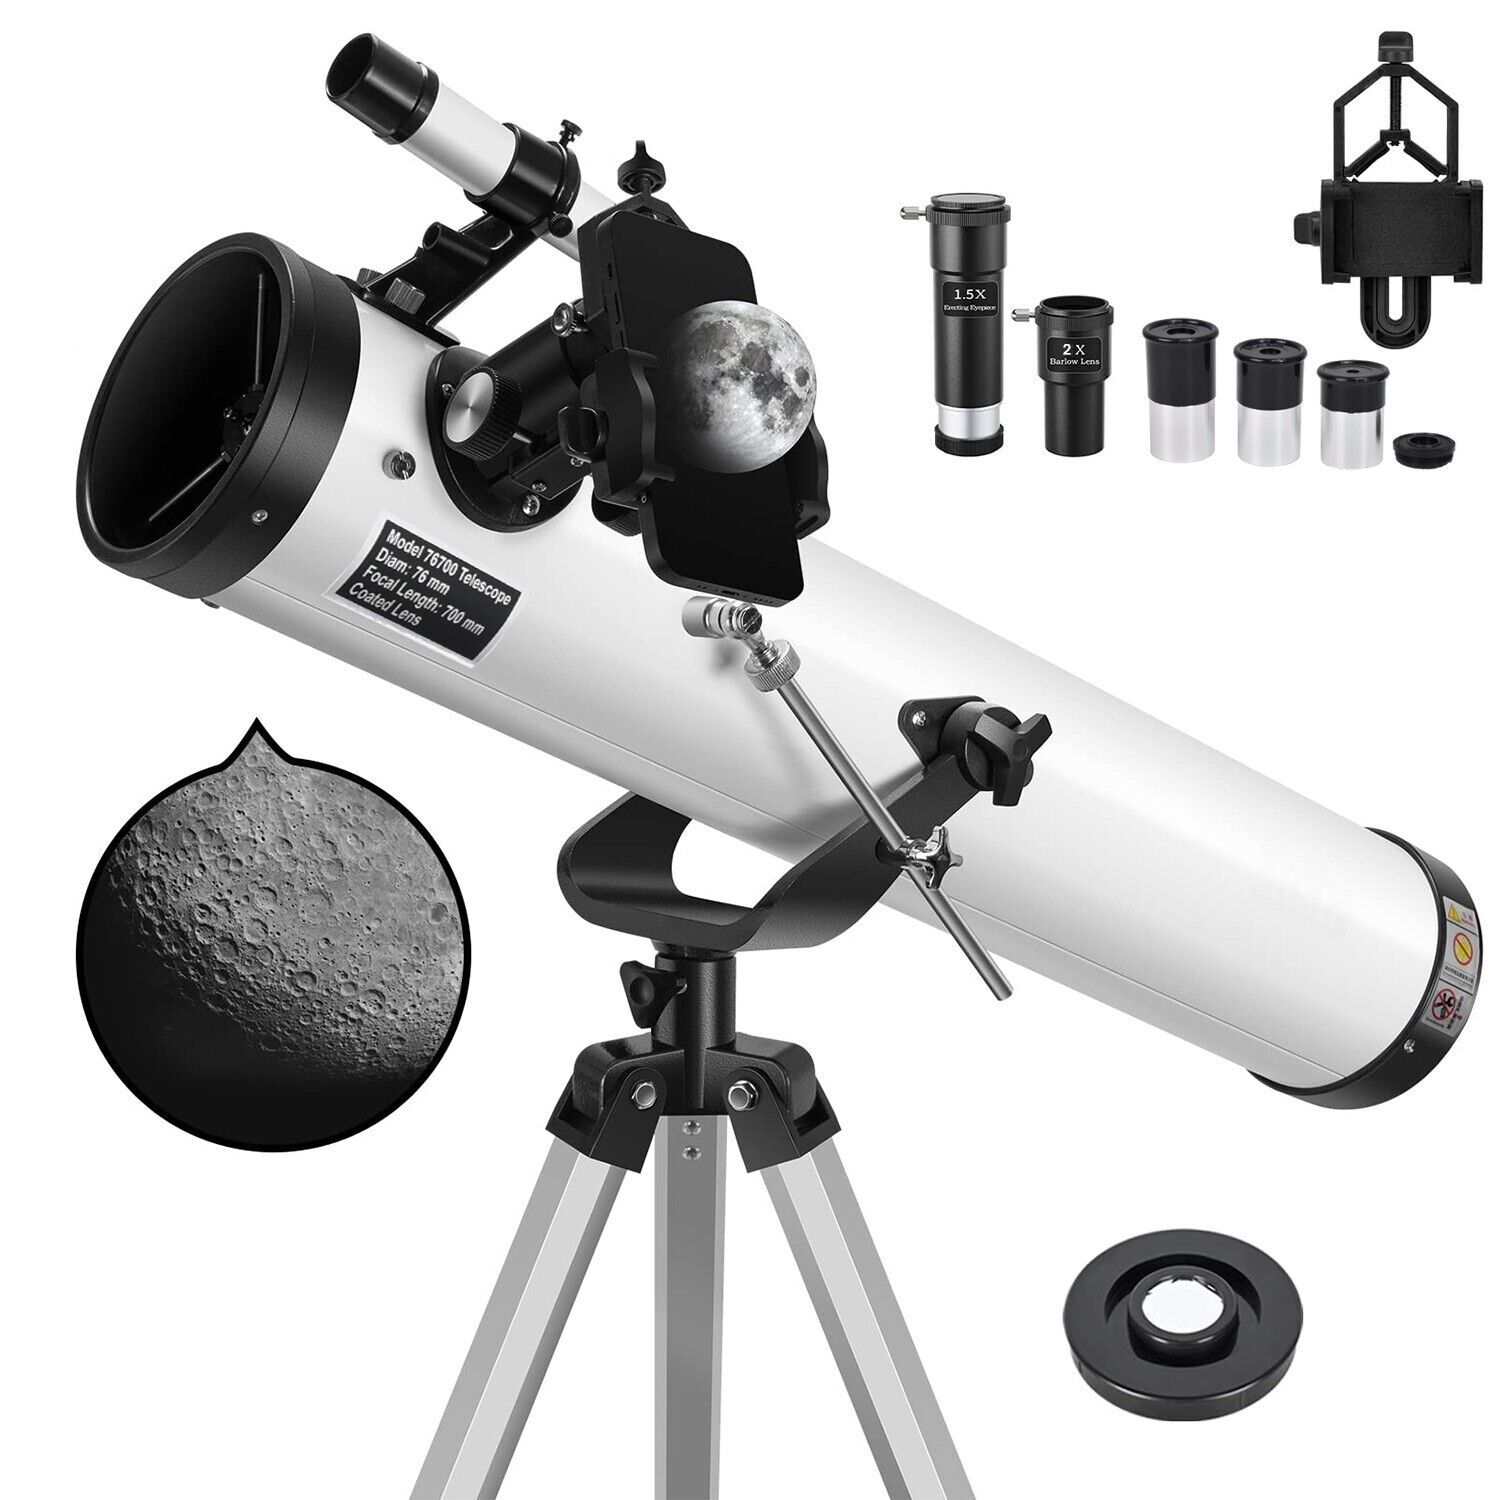 700mm Reflector Astronomical Telescope 350X with Phone Adapter for Moon Watching